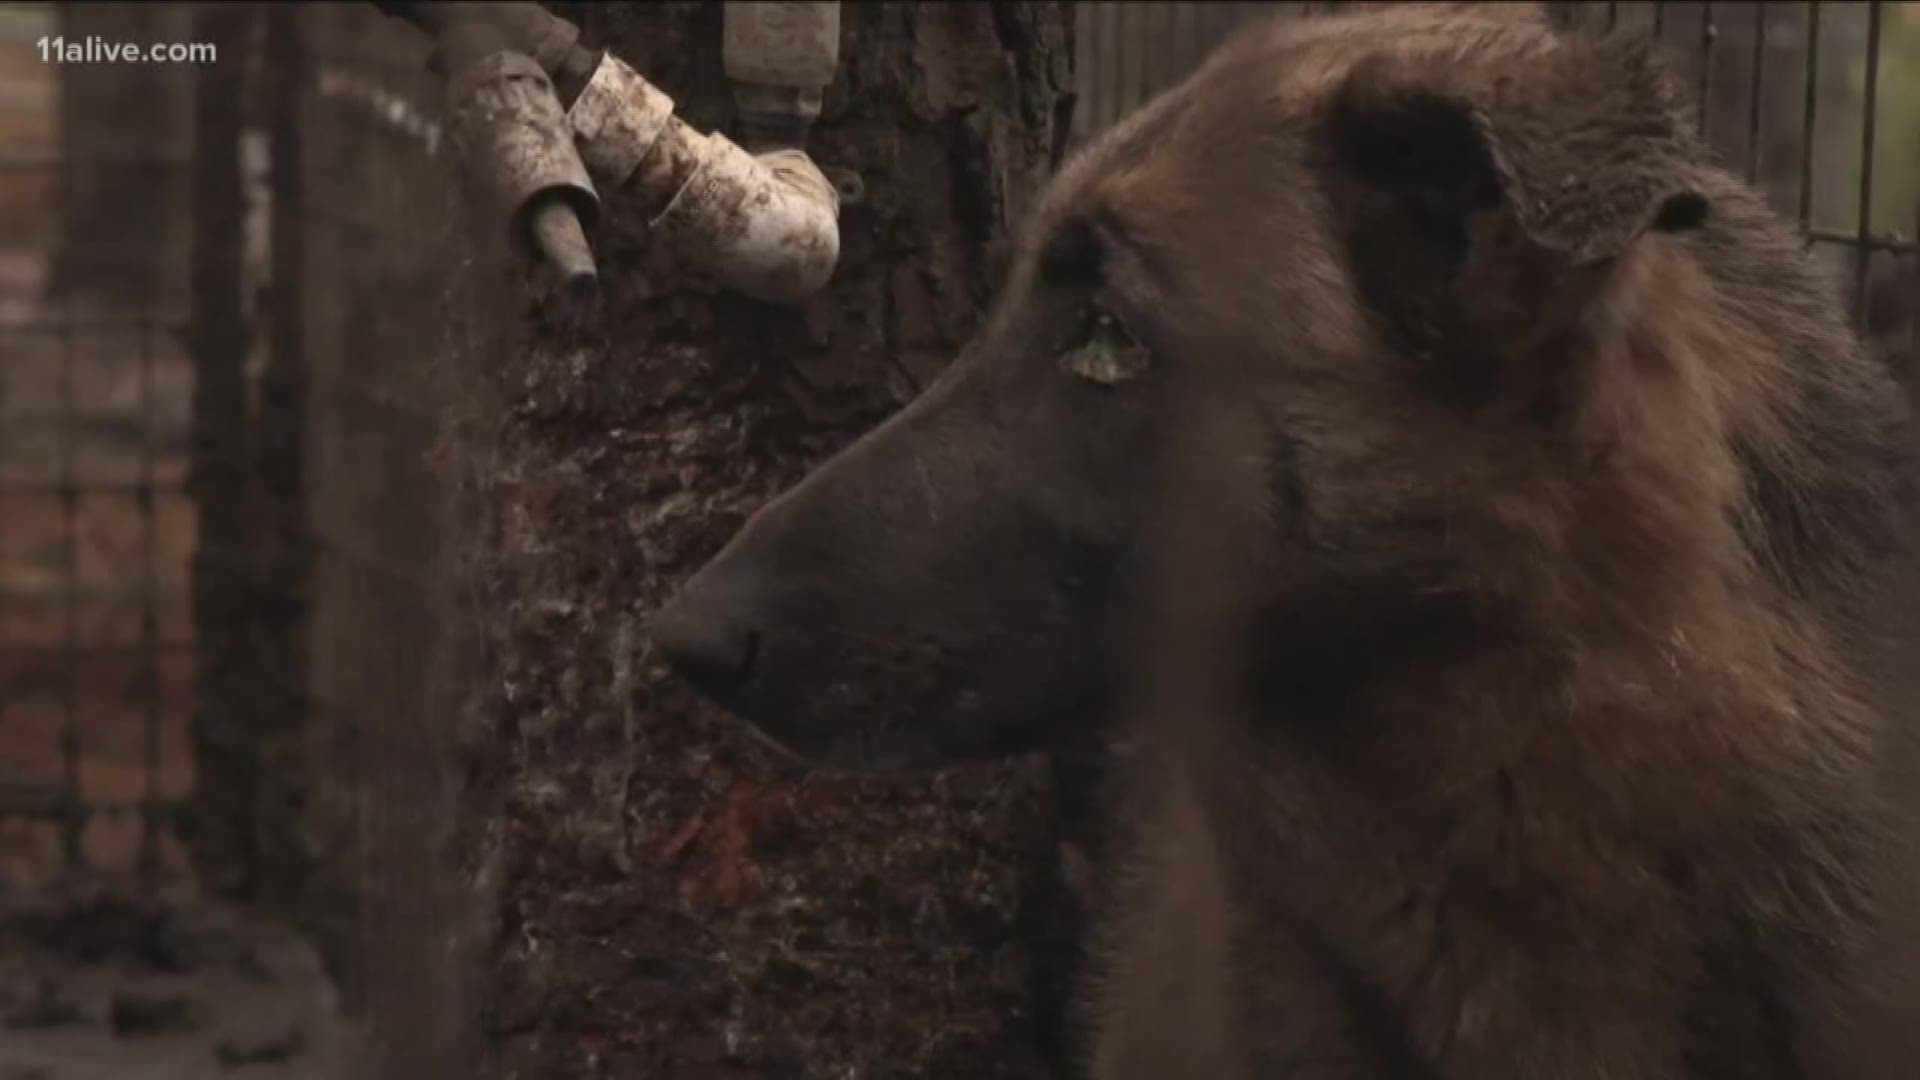 On Thursday, January 3, the Atlanta Humane Society’s Animal Cruelty Unit responded to a neglect case involving approximately 165 German Shepherd Dogs on a property in Metter, GA.